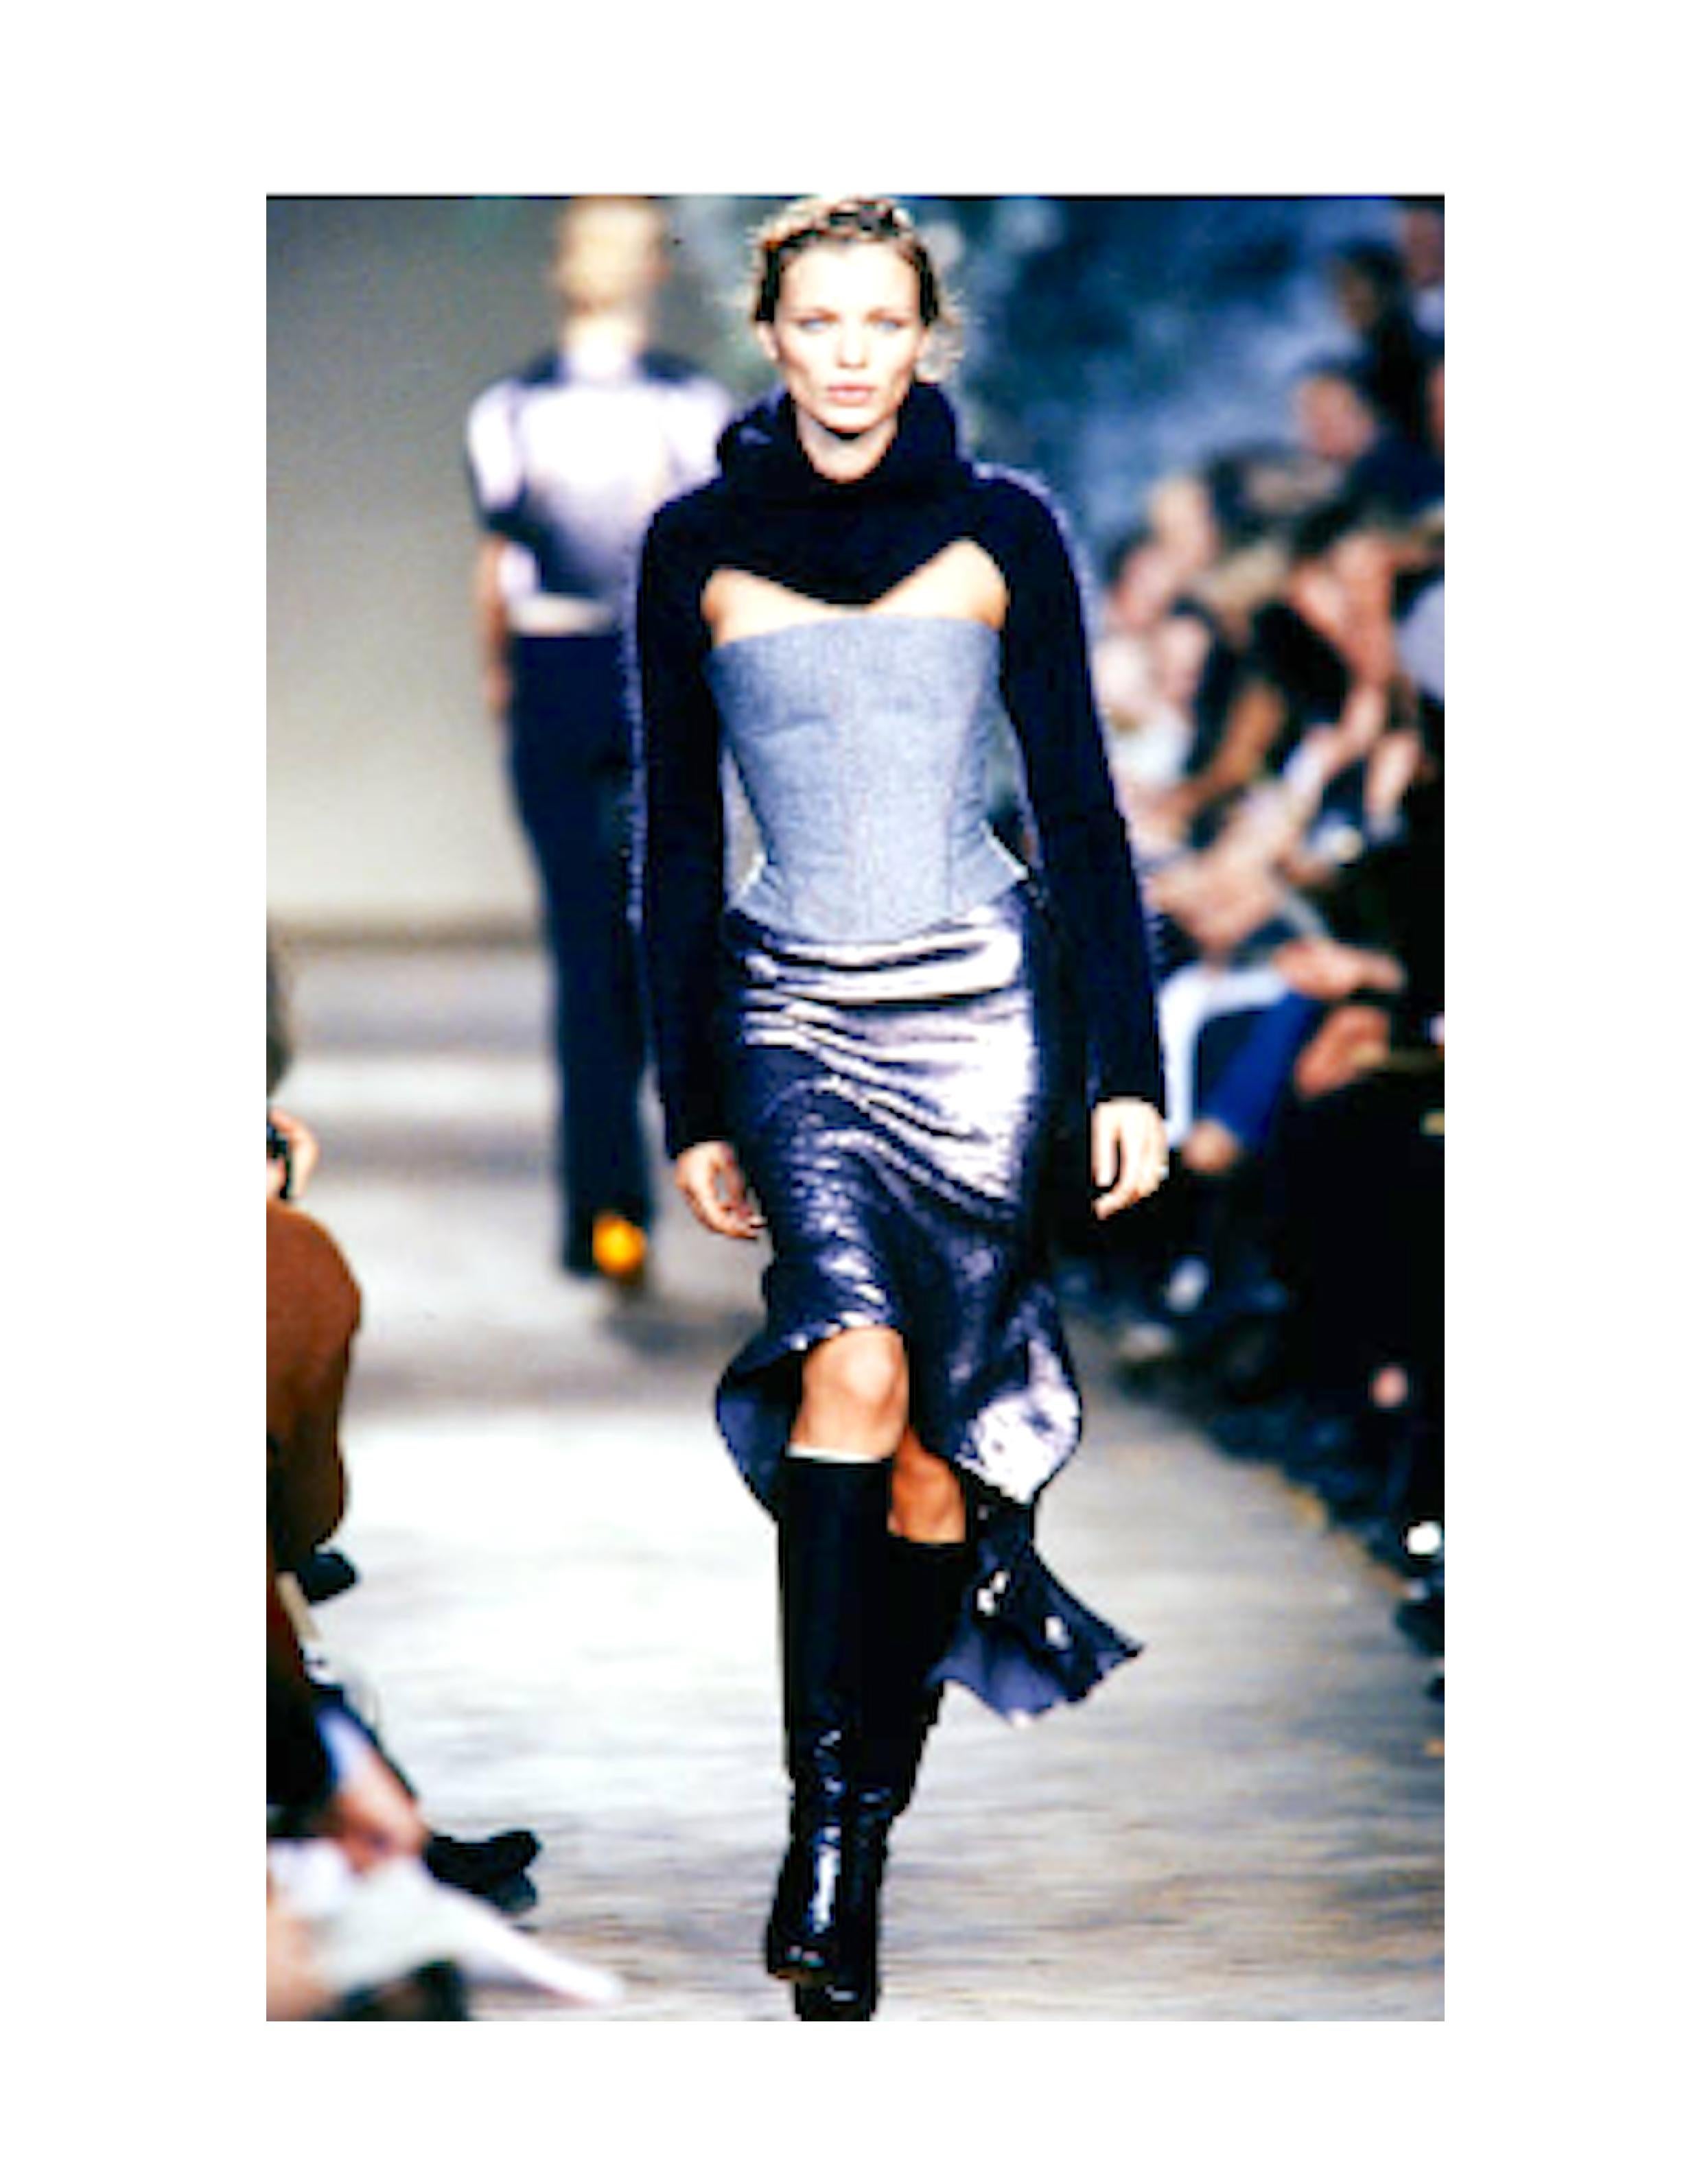 Extremely rare to find the Chloé runway 1999 by Stella McCartney and Phoebe Philo sequin skirt.

This prune sequin fishtail style skirt is a stunning piece created by the talented designers at the time for Chloé 1999 collection and modeled by the